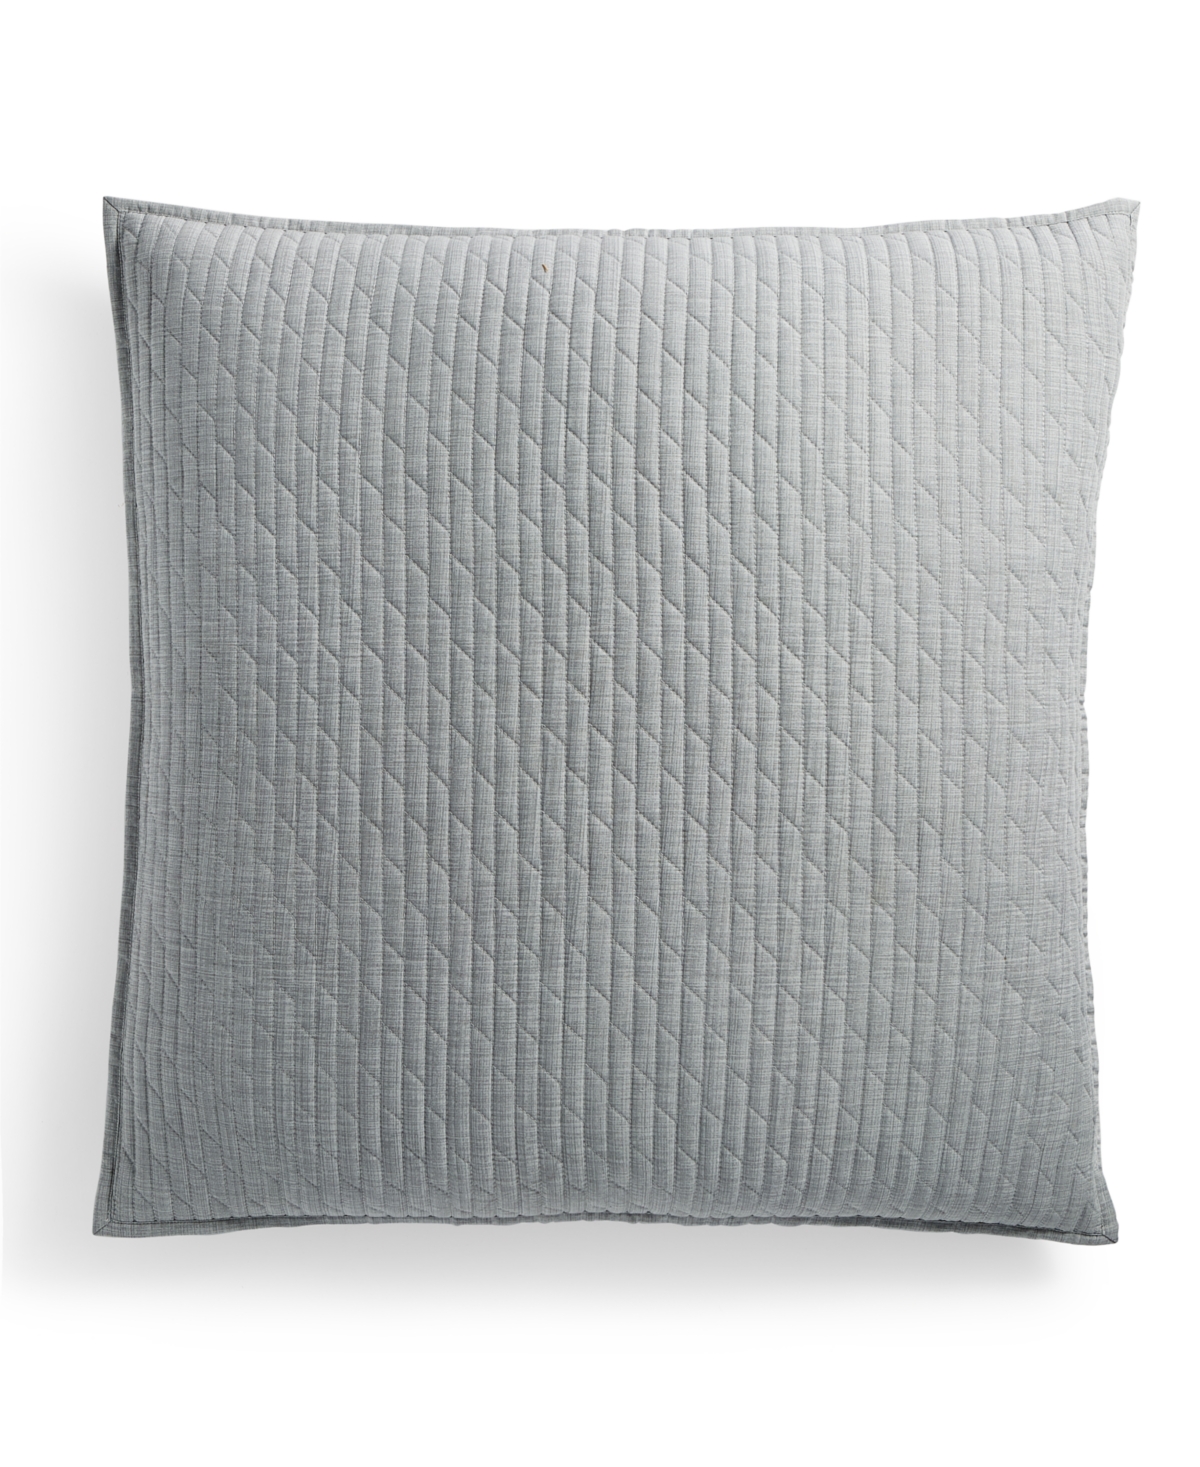 Bedford Geo Quilted Sham, European, Created for Macy's - Grey